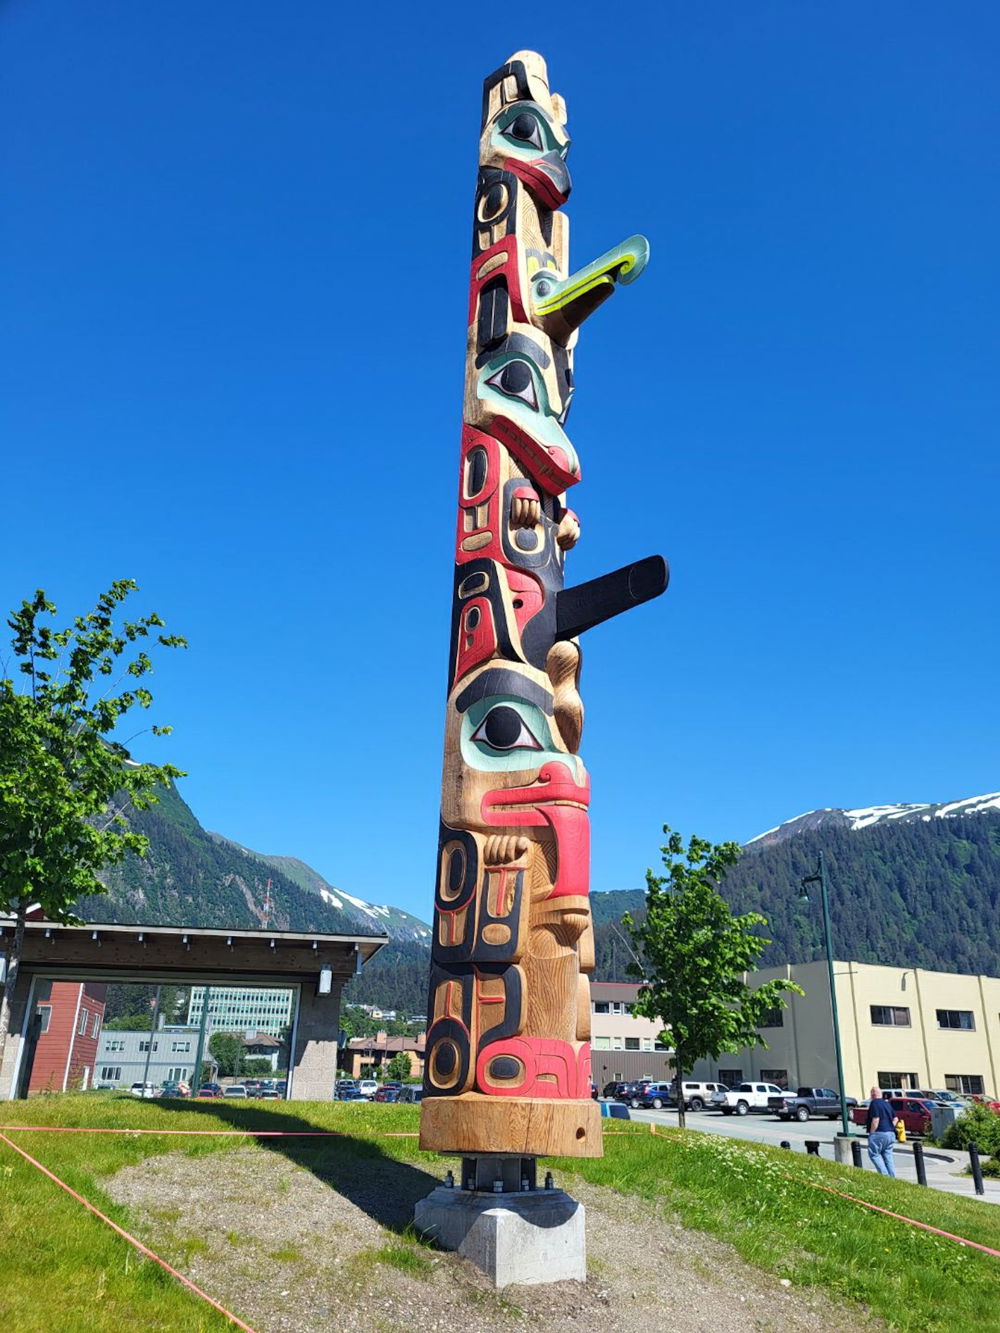 A tall totem pole in front of a mountain landscape. The structure is a long wooden pole ornately carved with three stylized animals one sitting on top of the other and painted in a limited color palette of red, black, green, white, and gray-blue.